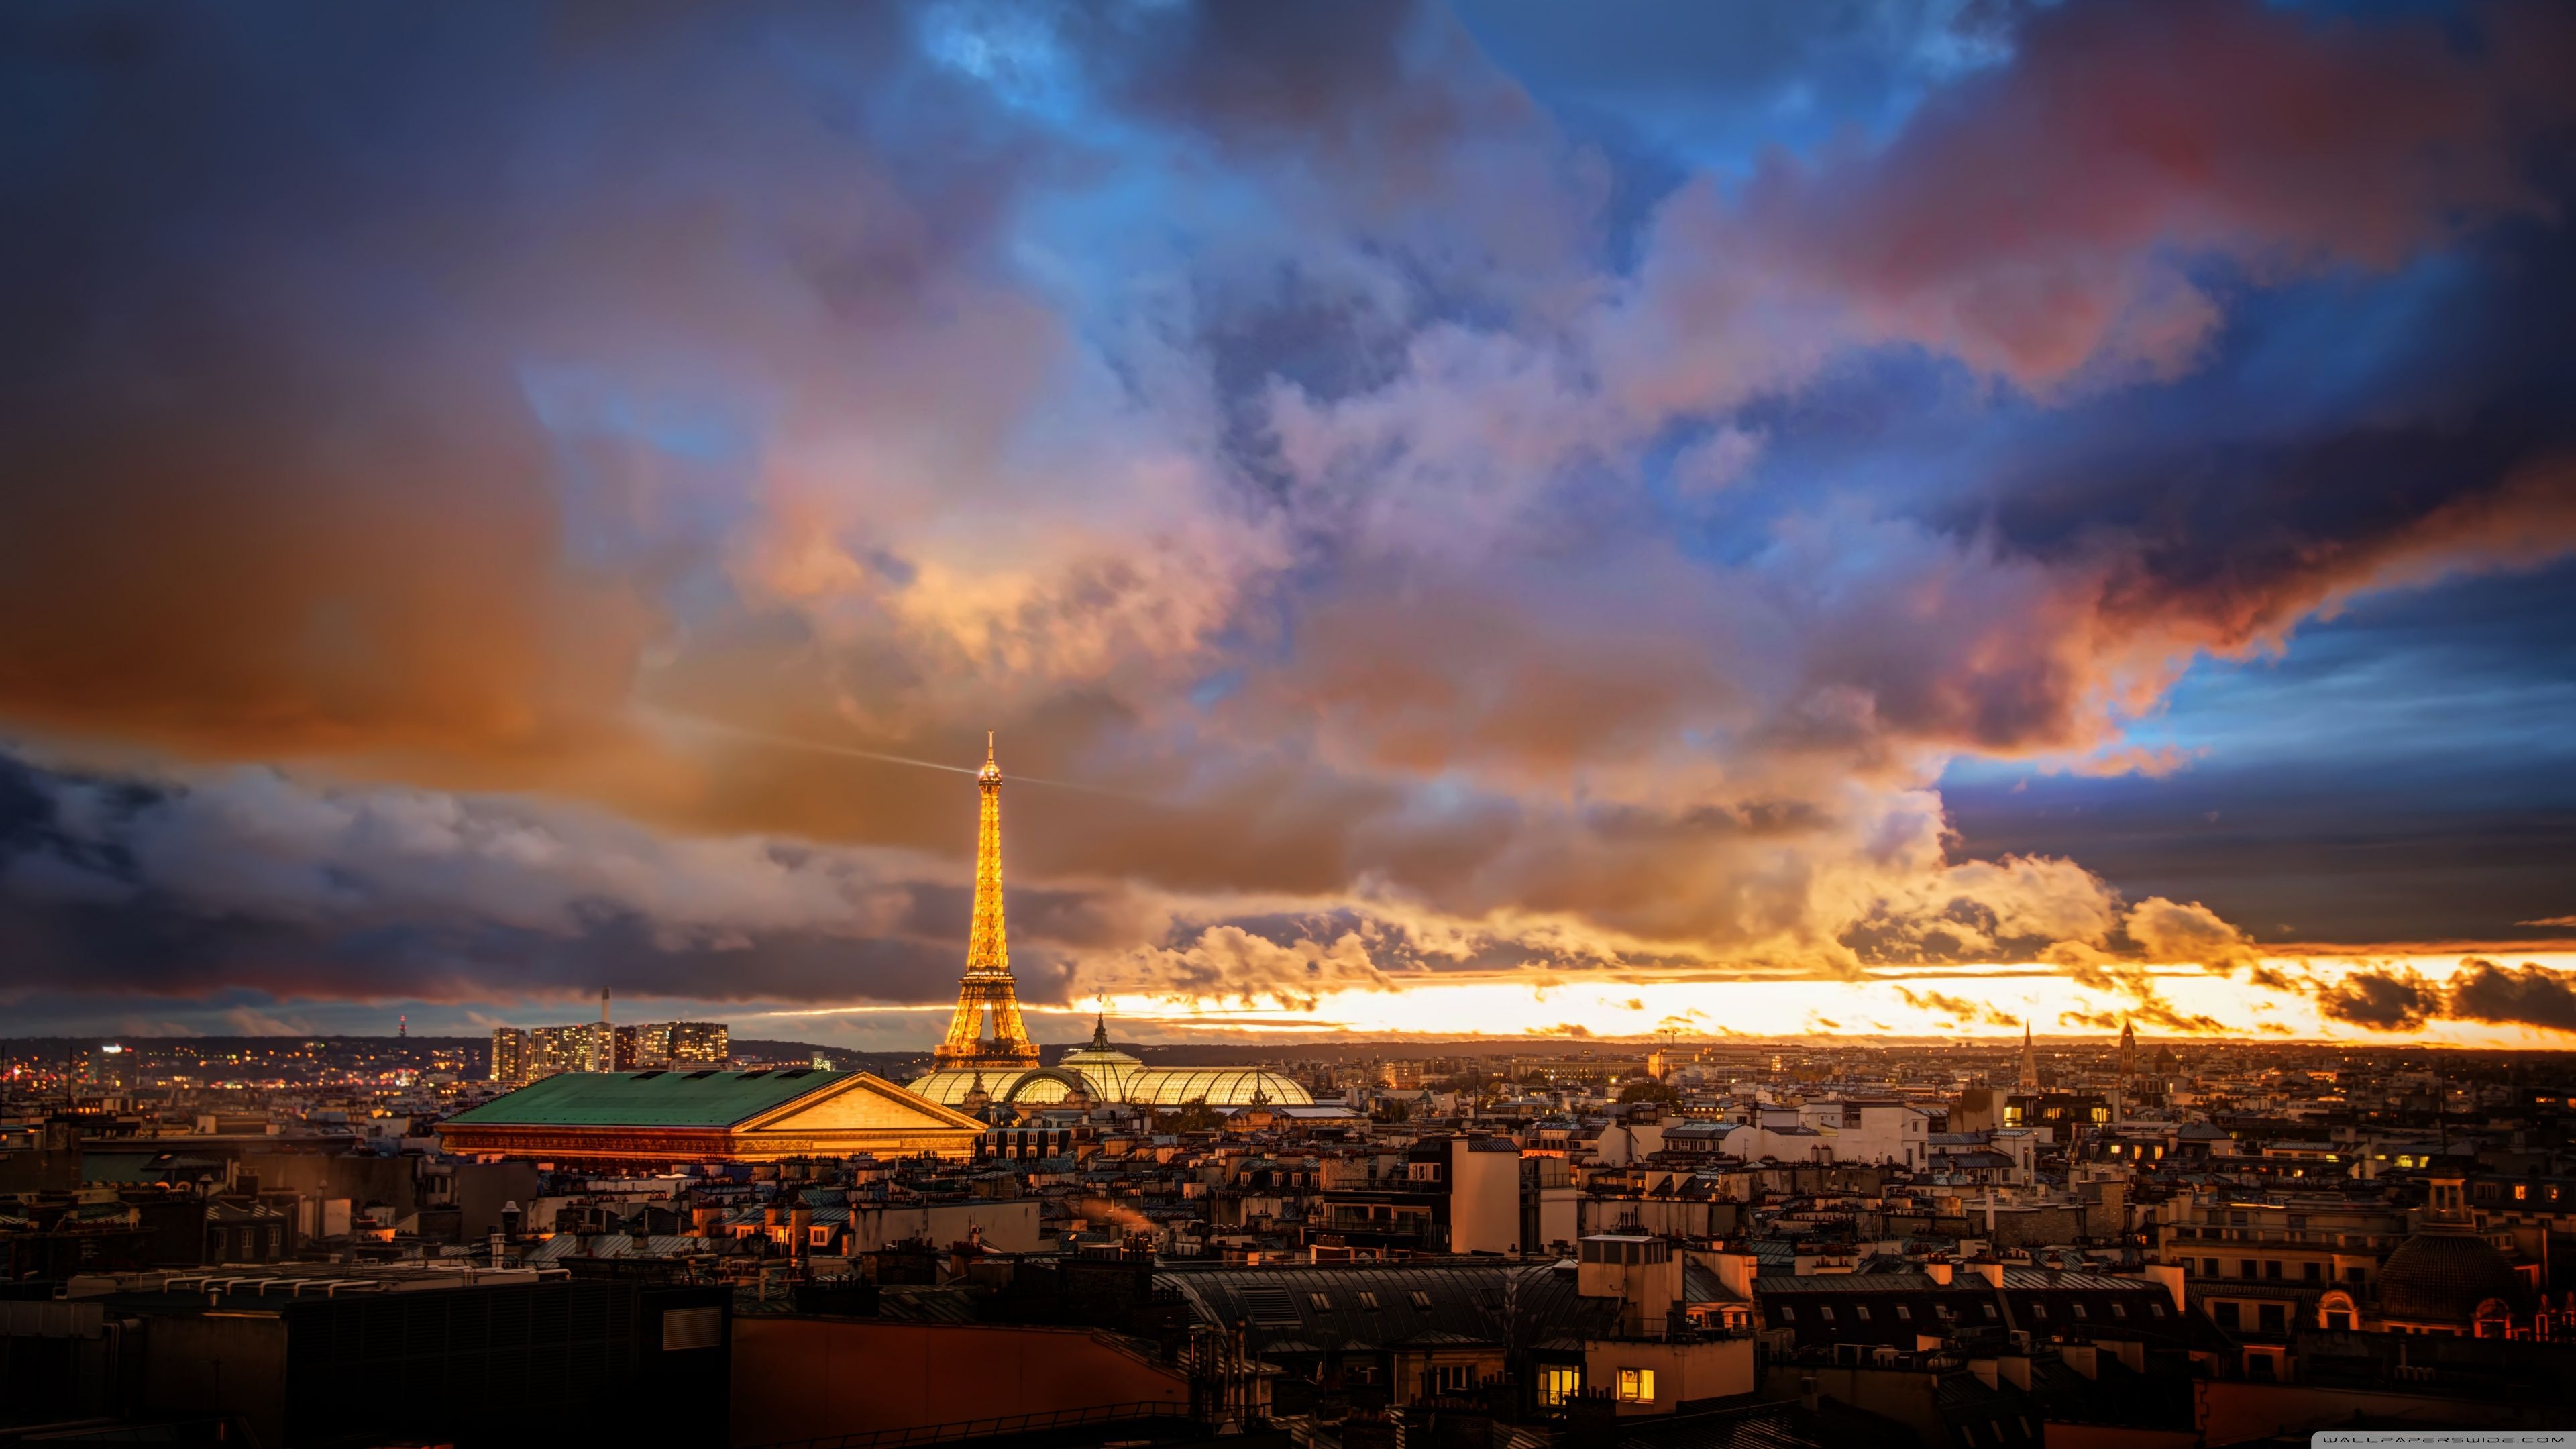 A city skyline with clouds and the eiffel tower - Paris